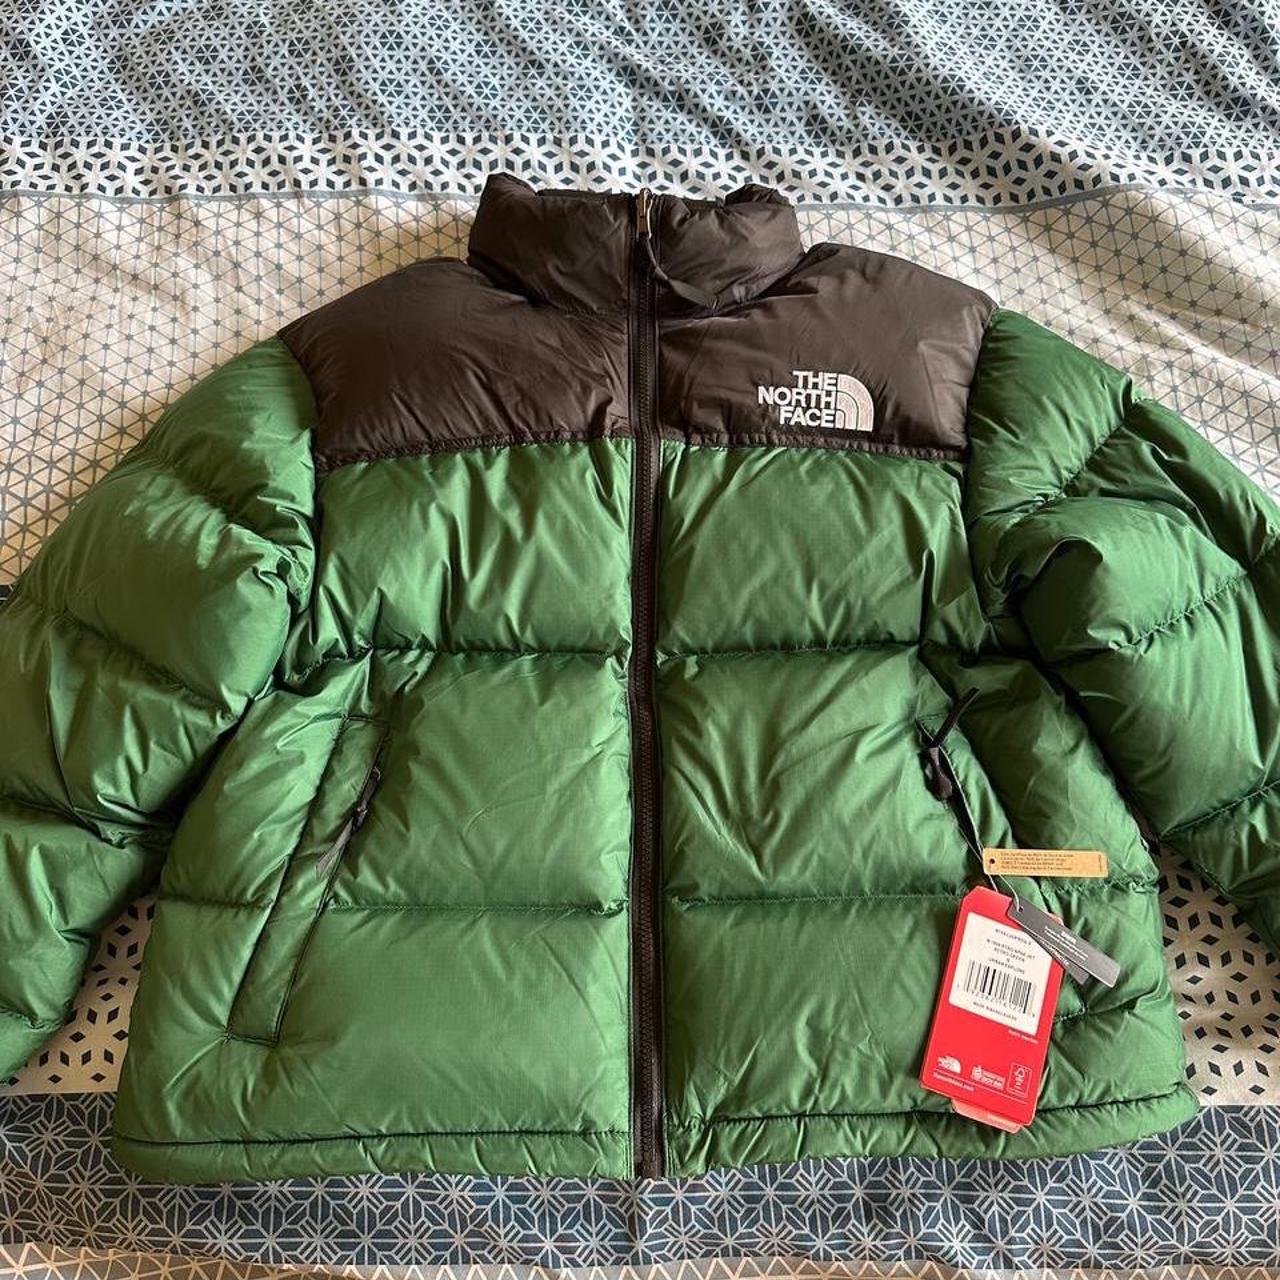 LAST ONE LEFT! Green North Face puffer jacket 700... - Depop